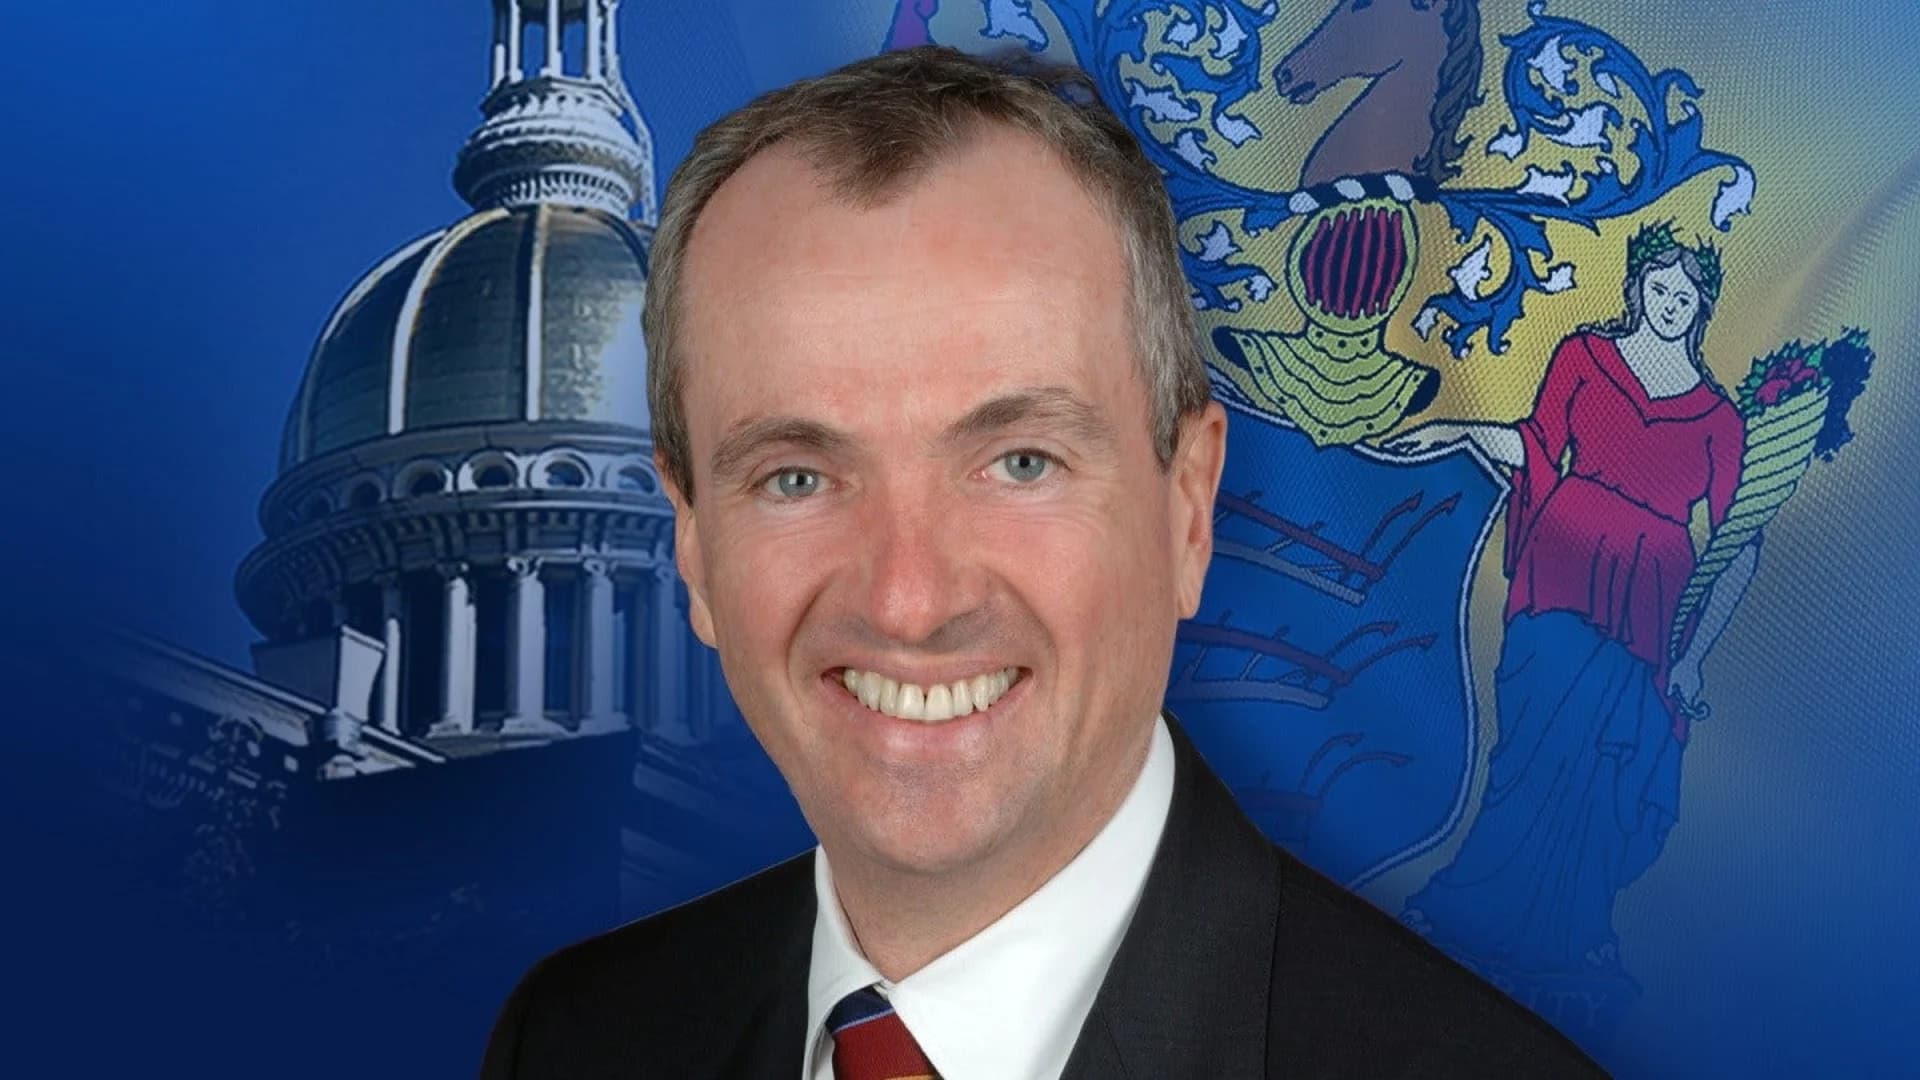 Gov. Murphy signs bill allowing $10B in debt to fill budget holes caused by pandemic